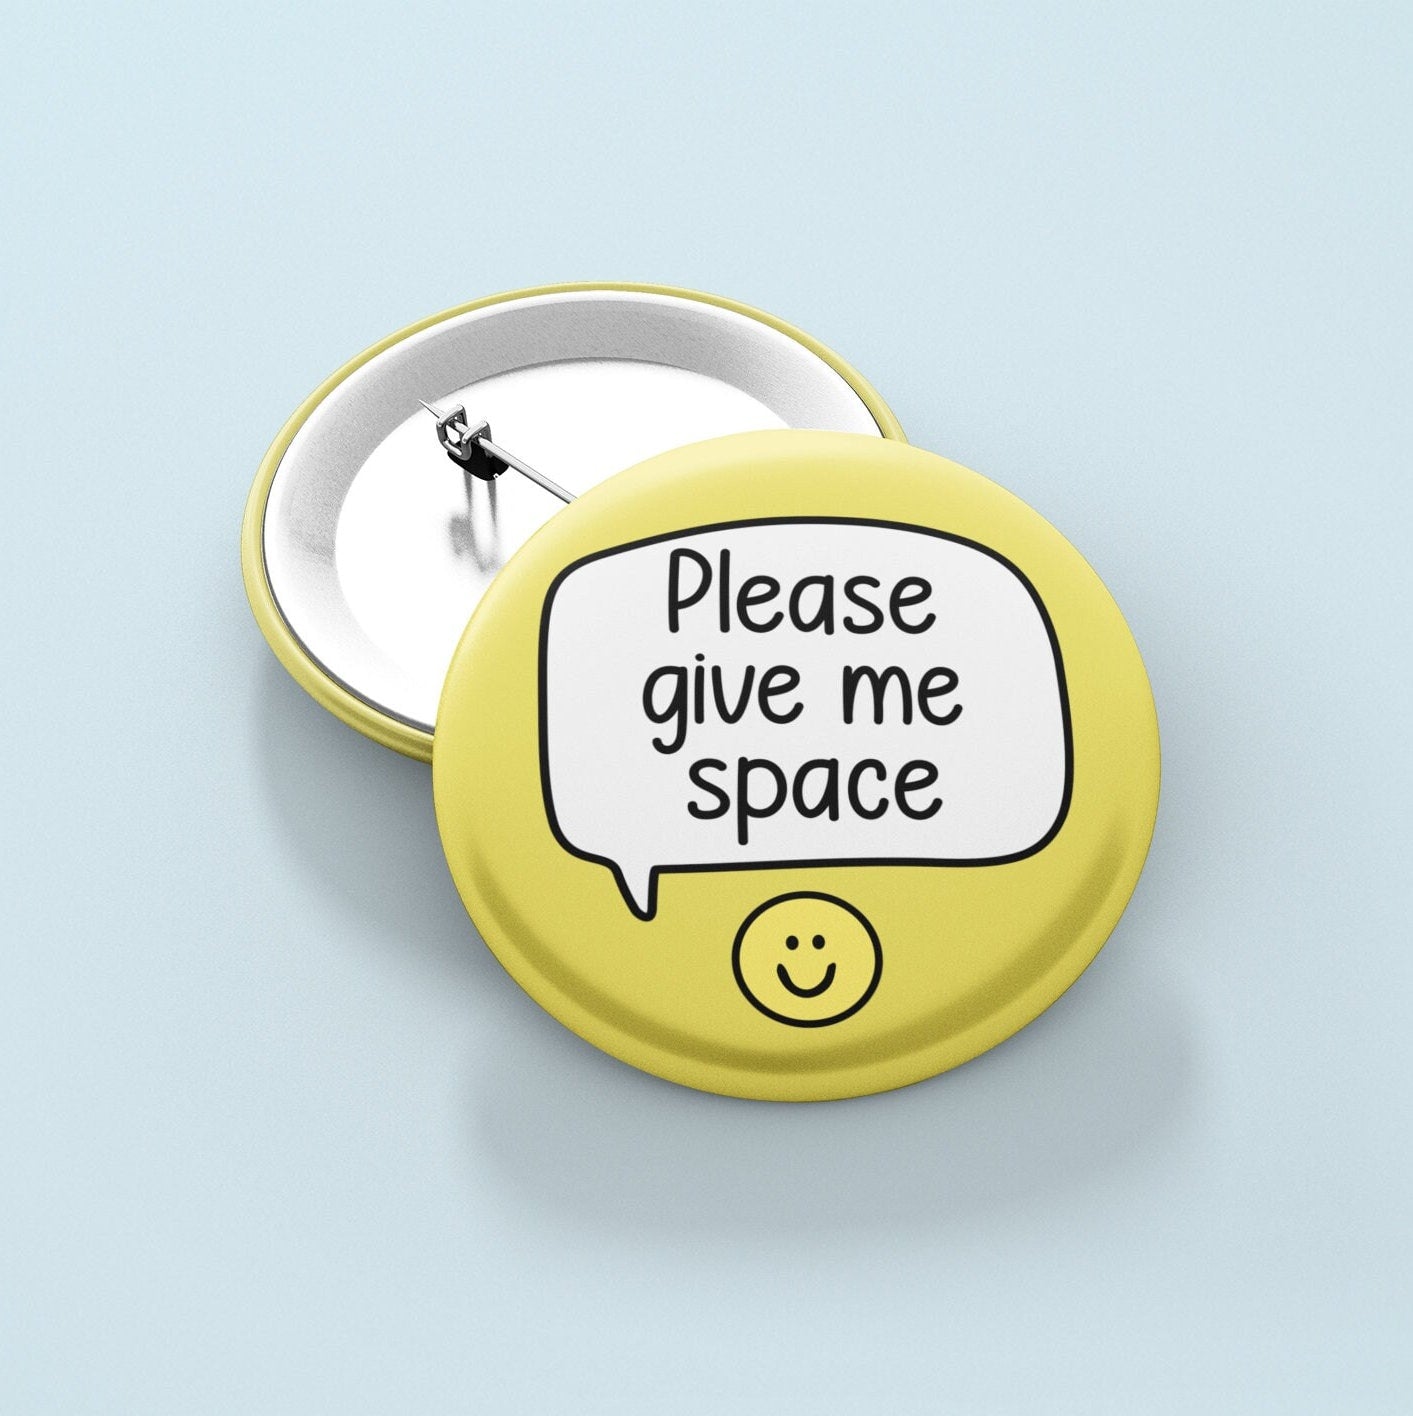 Please Give Me Space - Pin Badge | Personal Space Badge - Pin Buttons - Pins